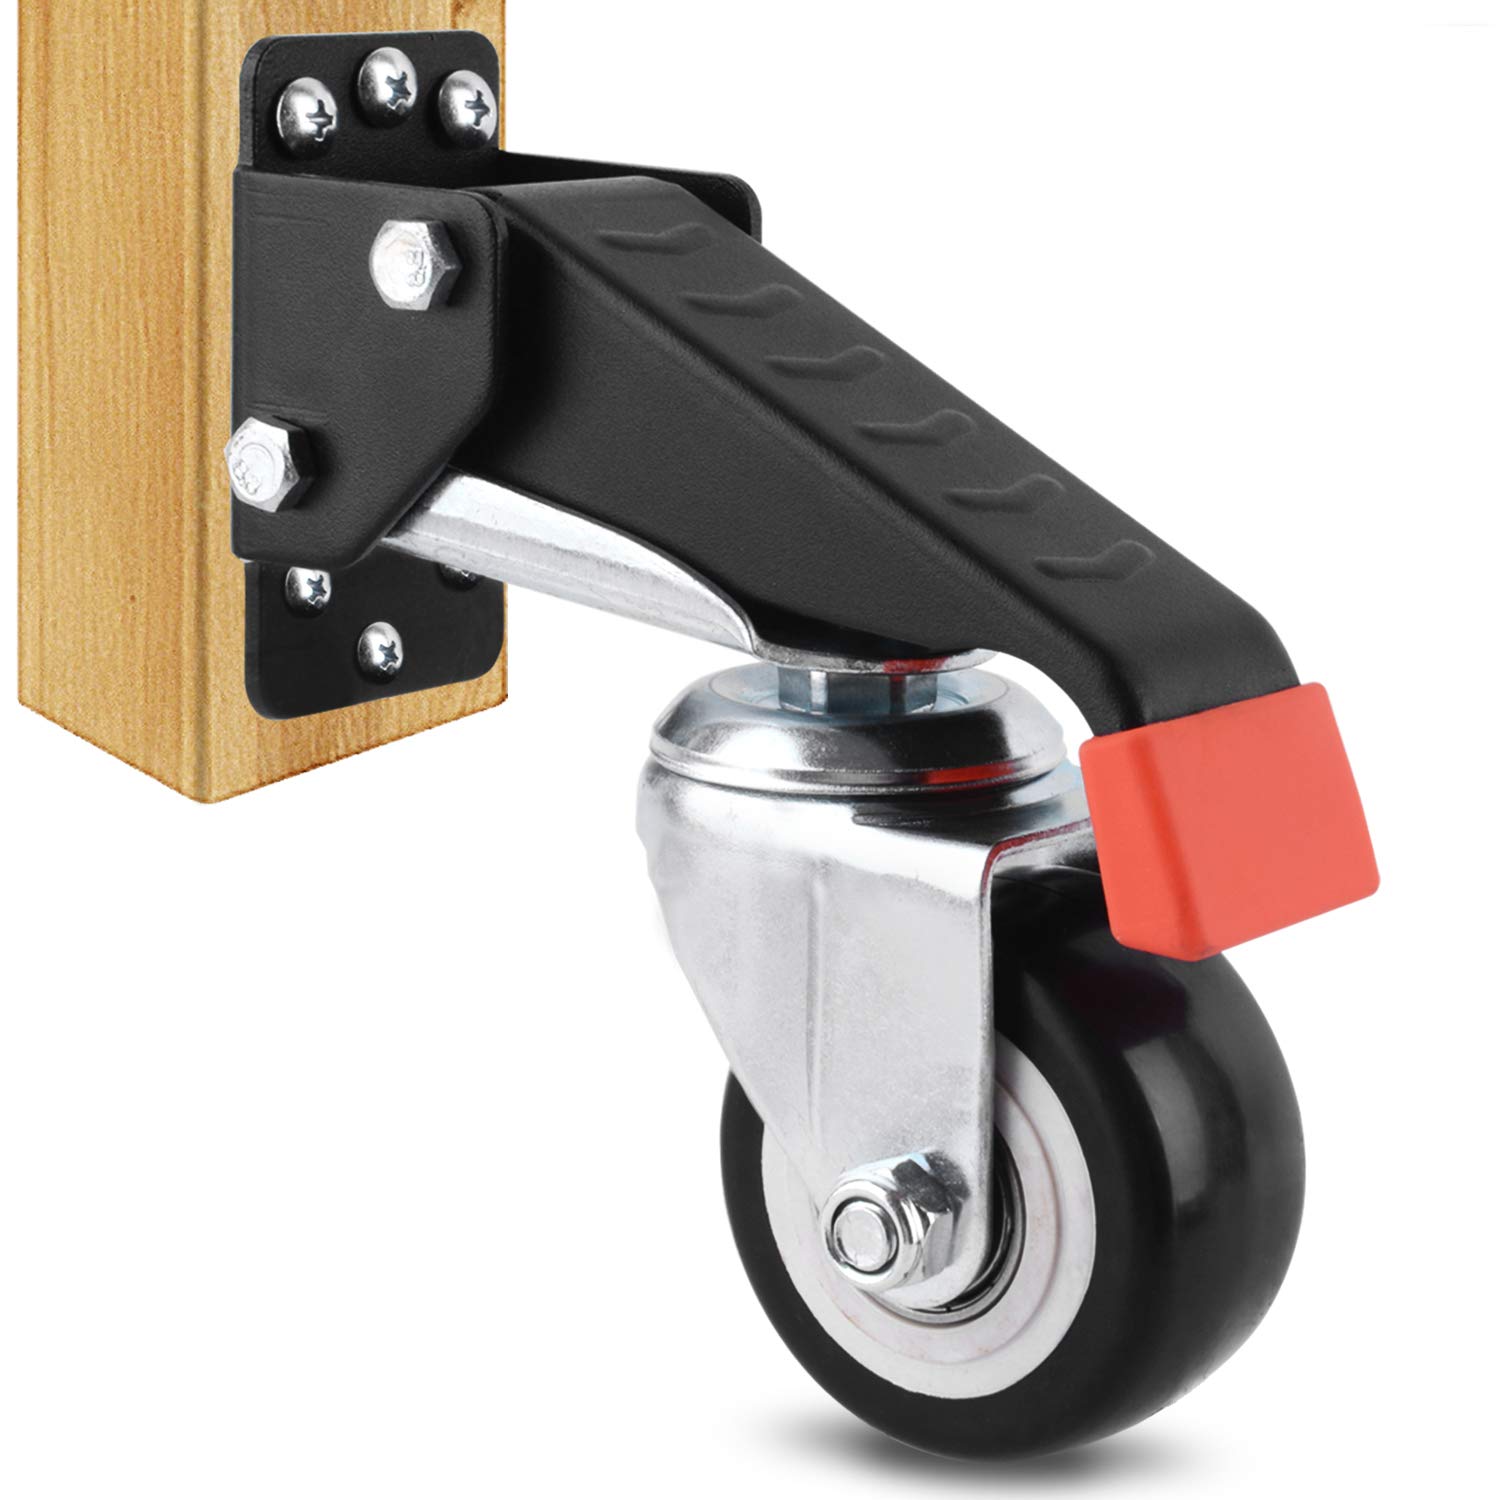 What are Self Locking Casters?